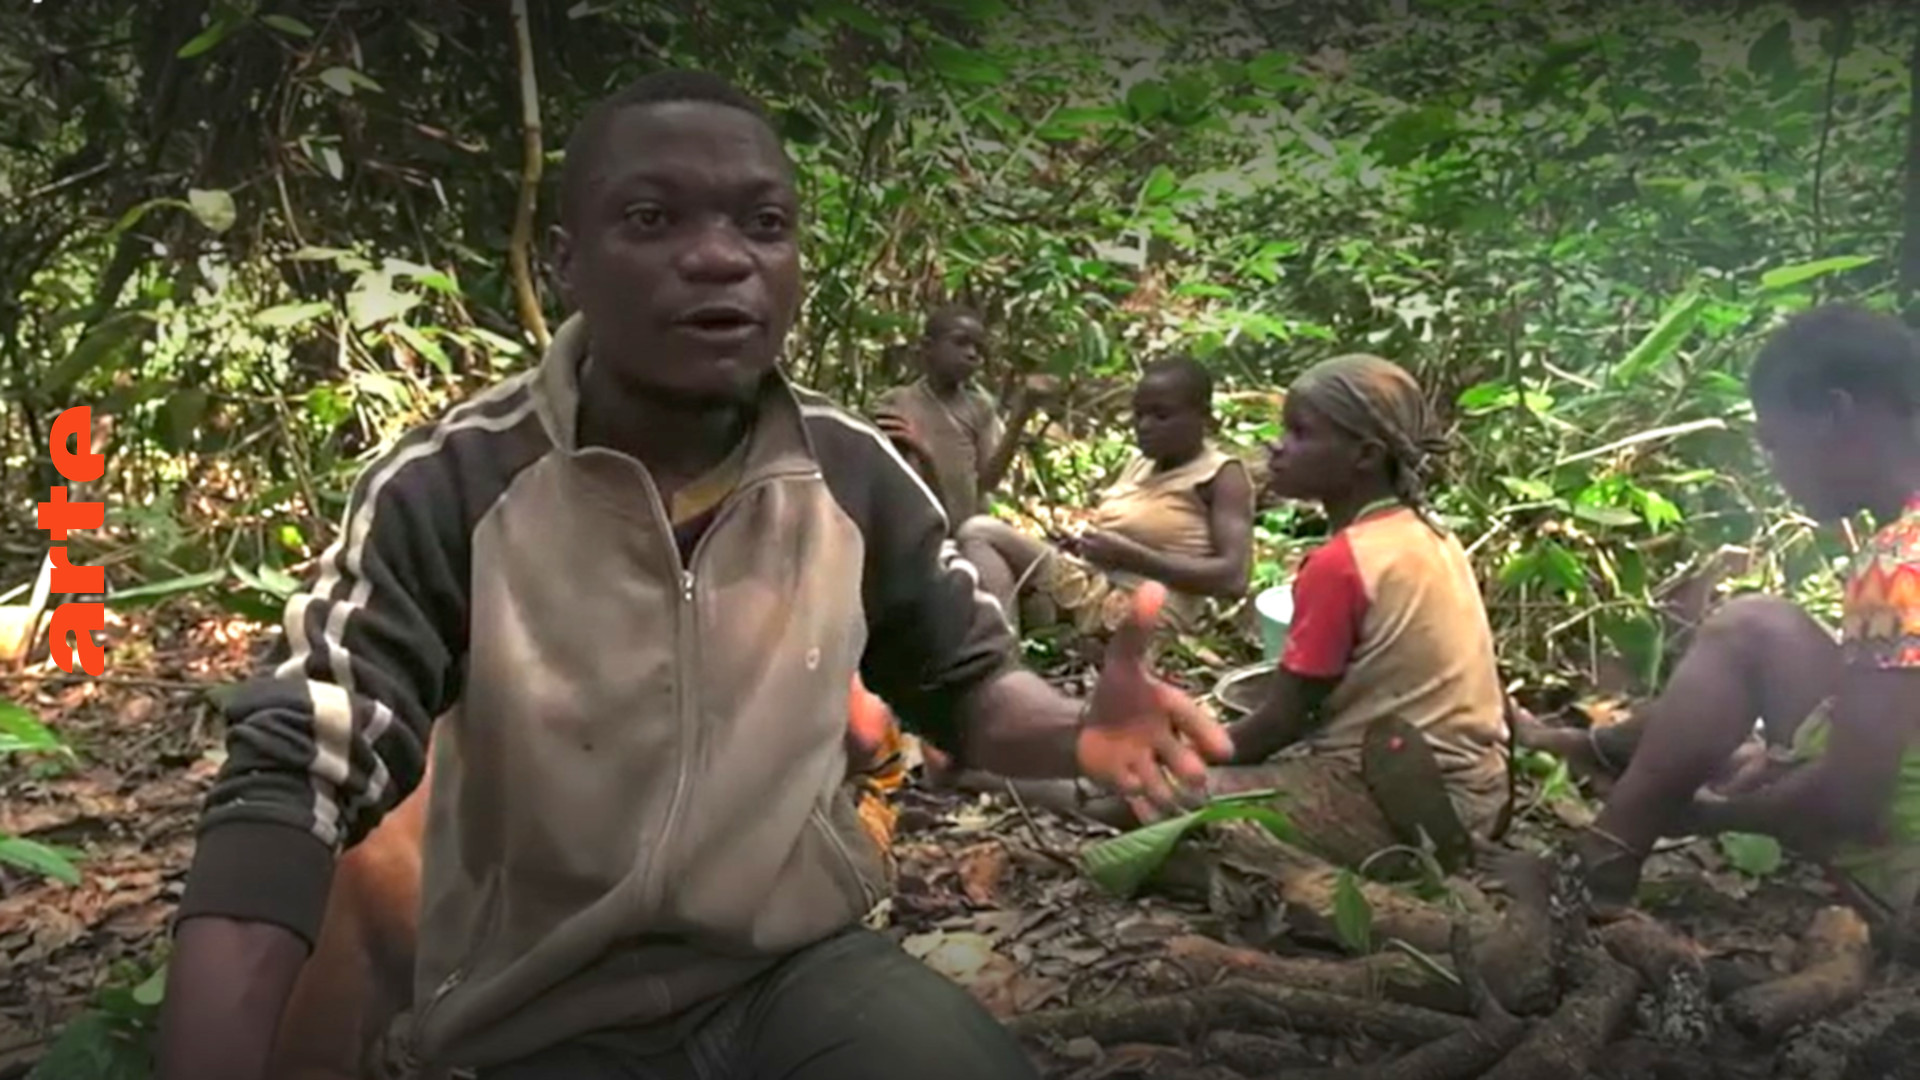 ARTE Reportage - Cameroon: The Green Terror - Watch the full documentary |  ARTE in English